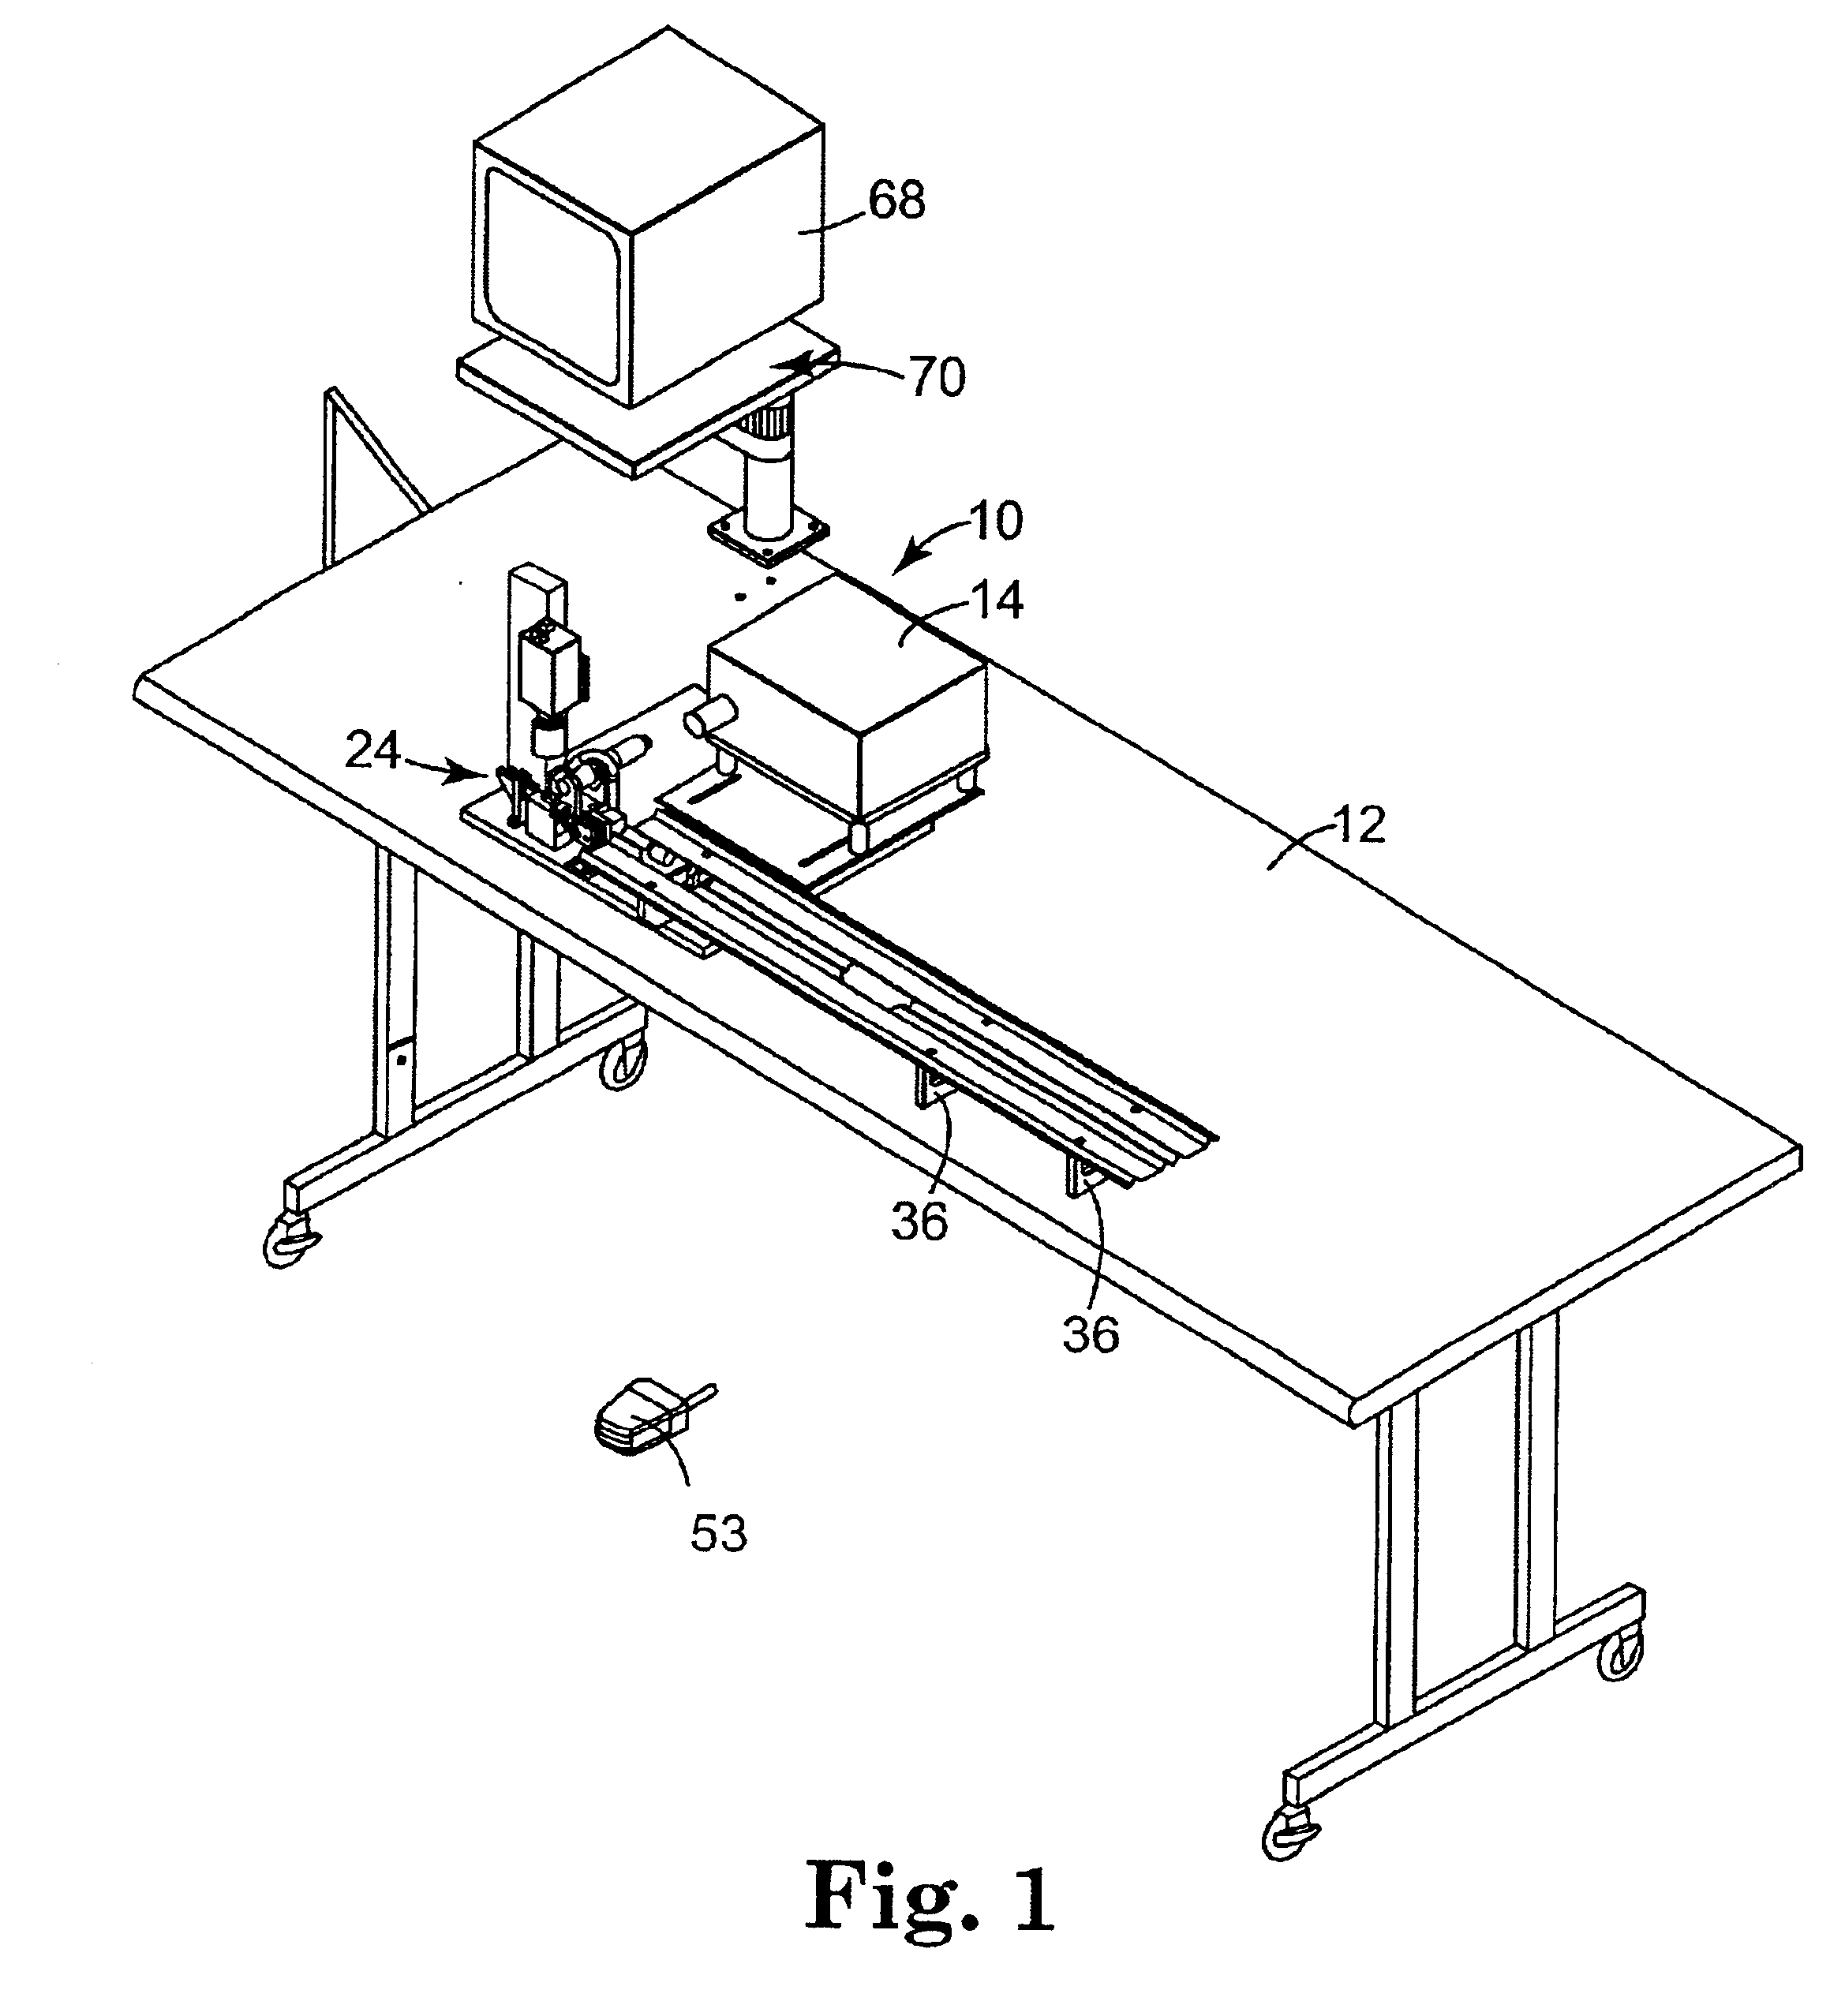 Apparatus and method for closed-loop control of RF generator for welding polymeric catheter components